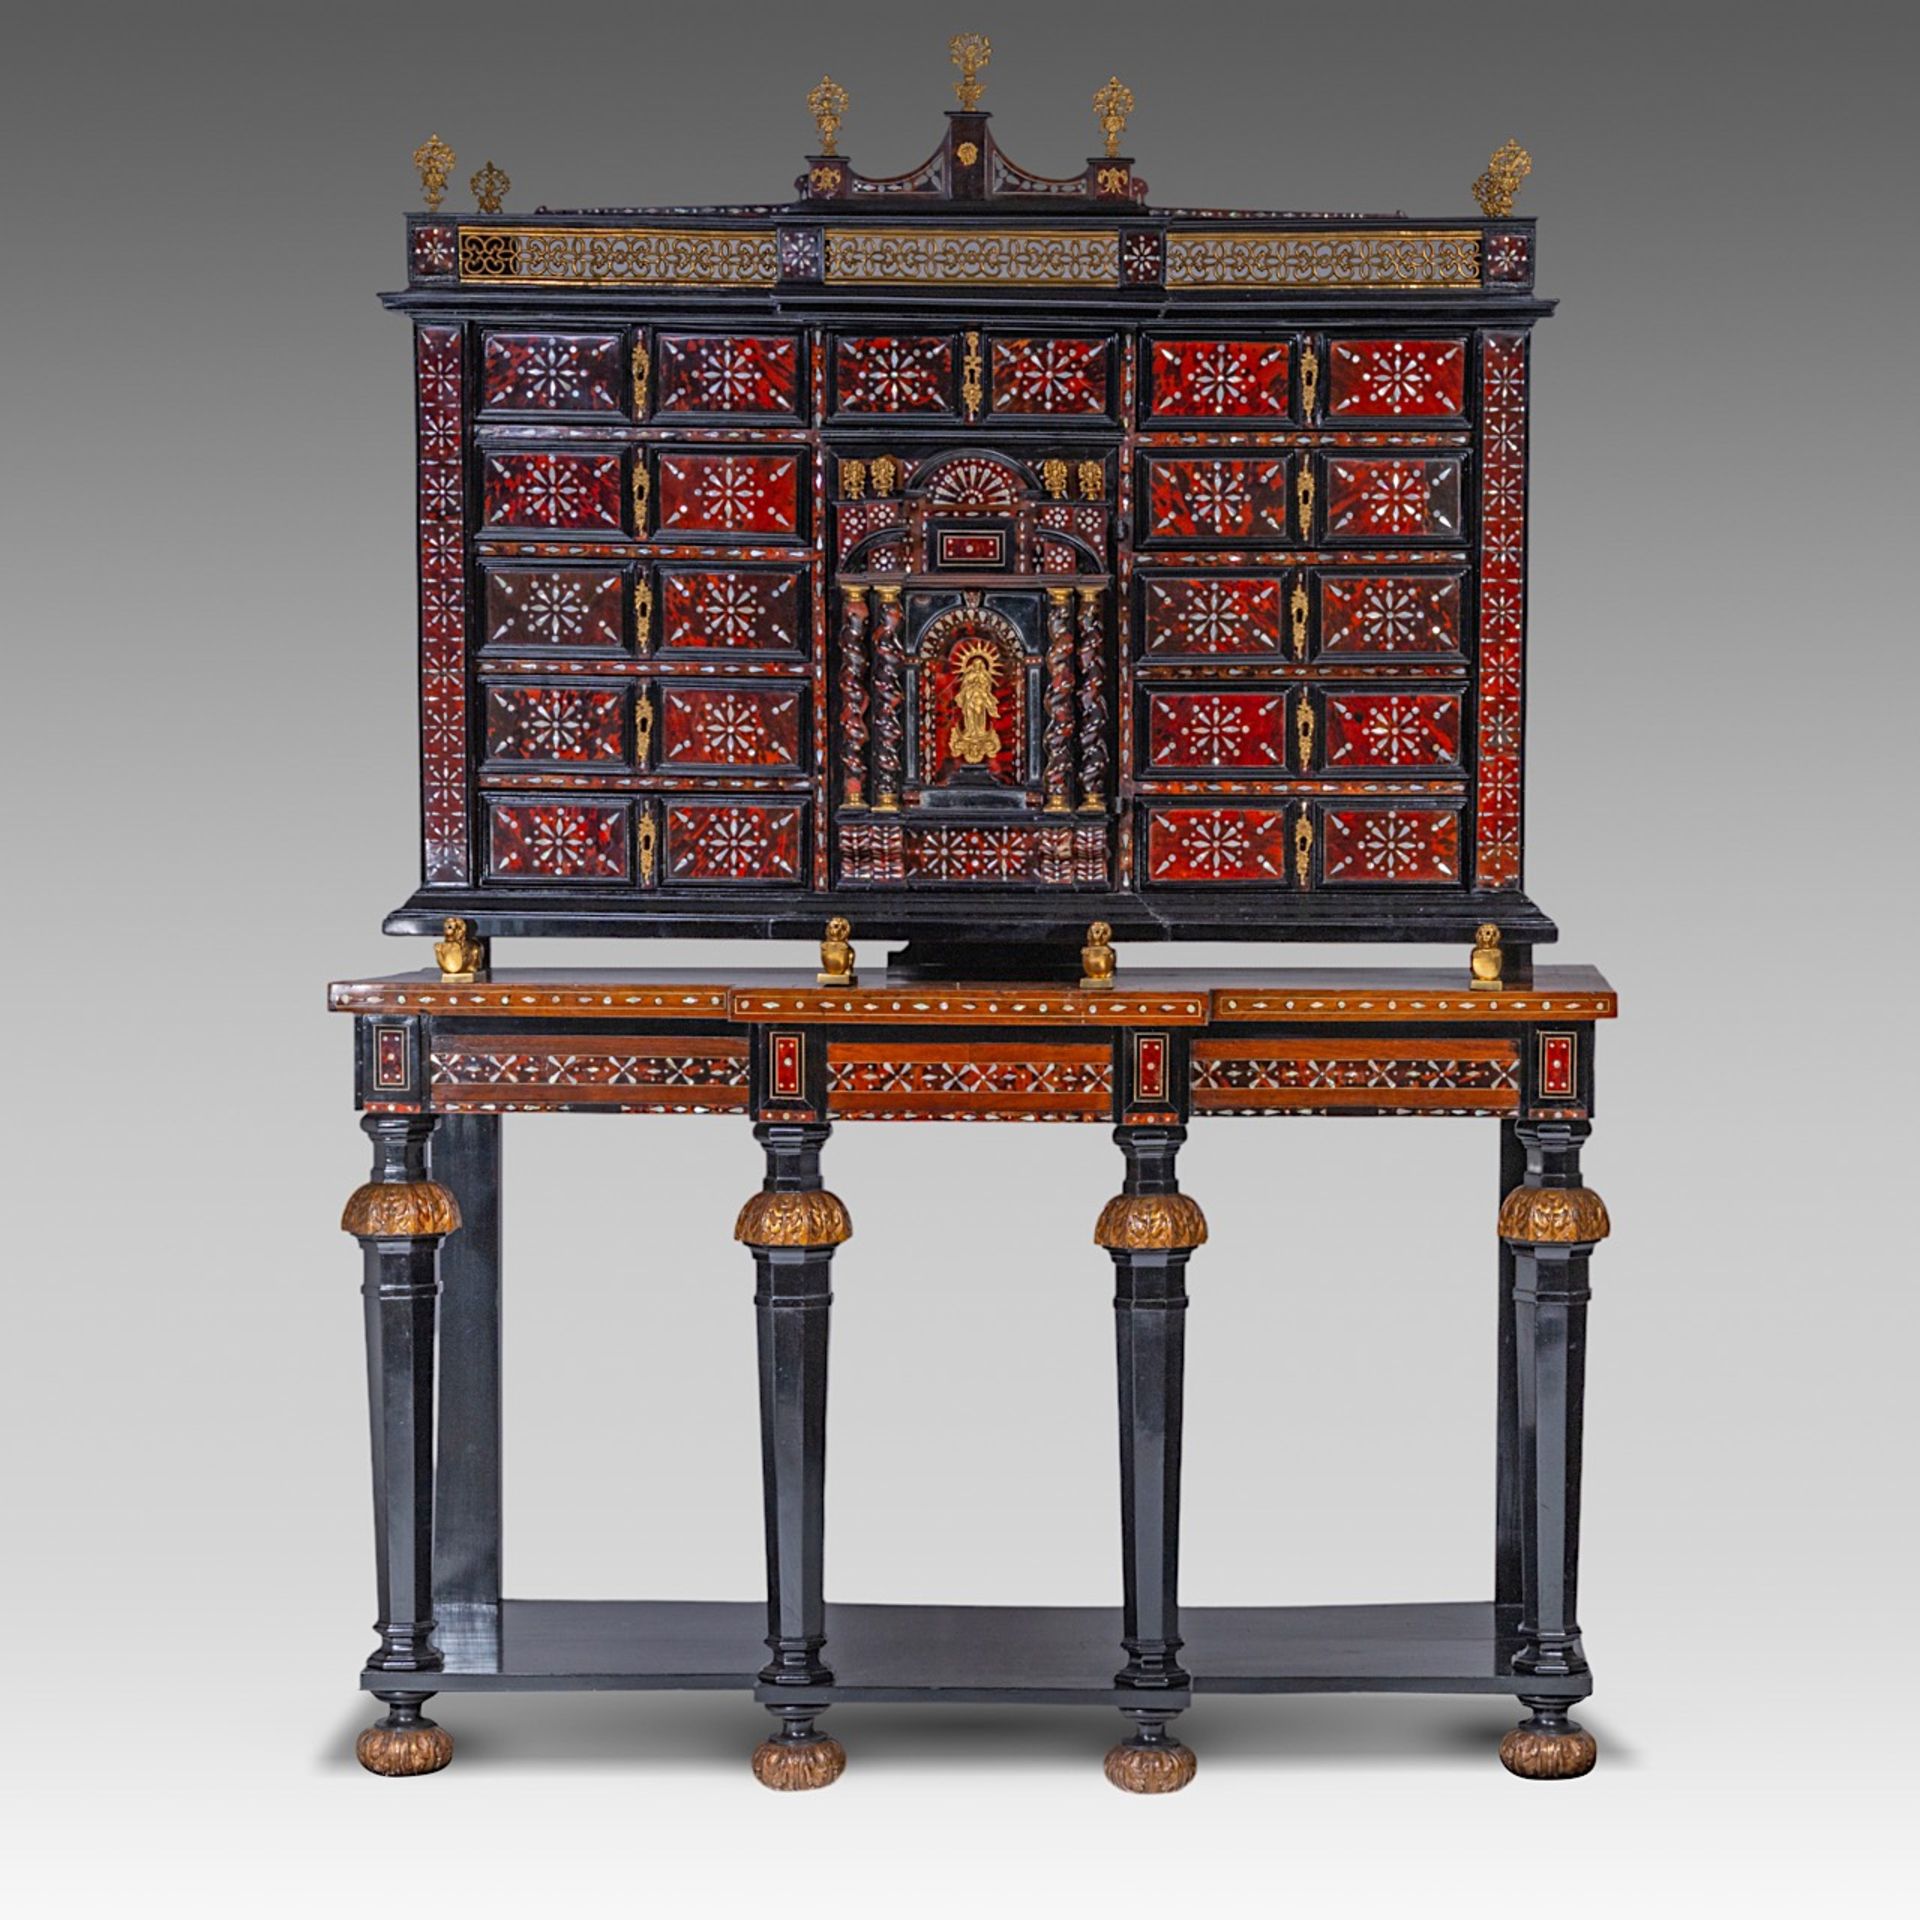 A 17thC cabinet-on-stand, inlaid with tortoiseshell, mother-of-pearl and ivory, H 194 cm (total) (+)